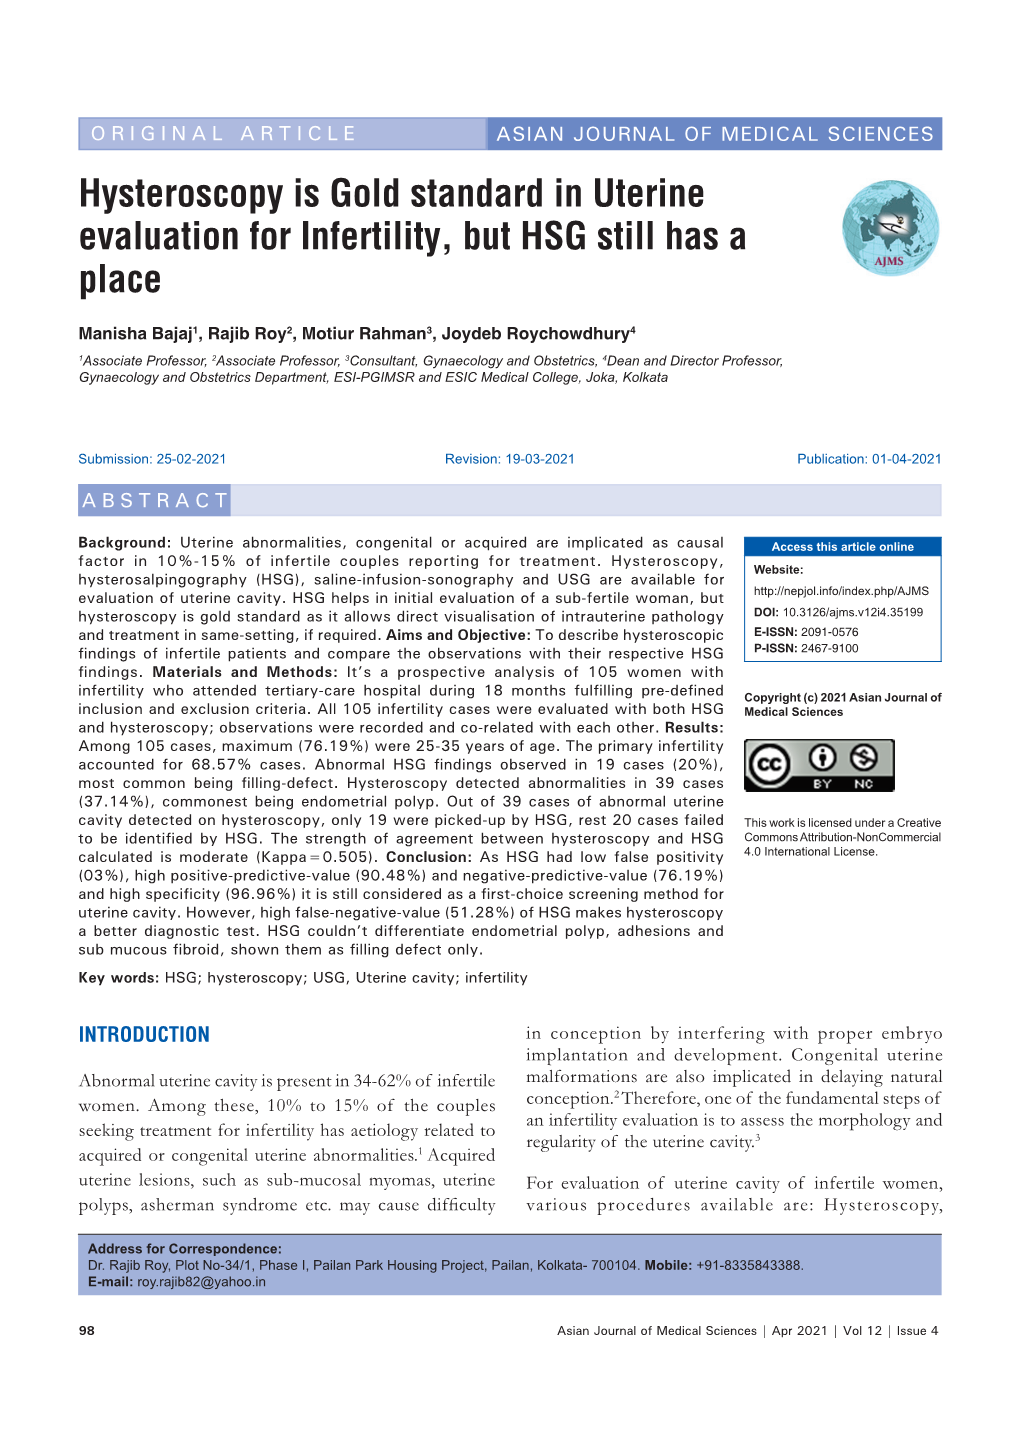 Hysteroscopy Is Gold Standard in Uterine Evaluation for Infertility, but HSG Still Has a Place